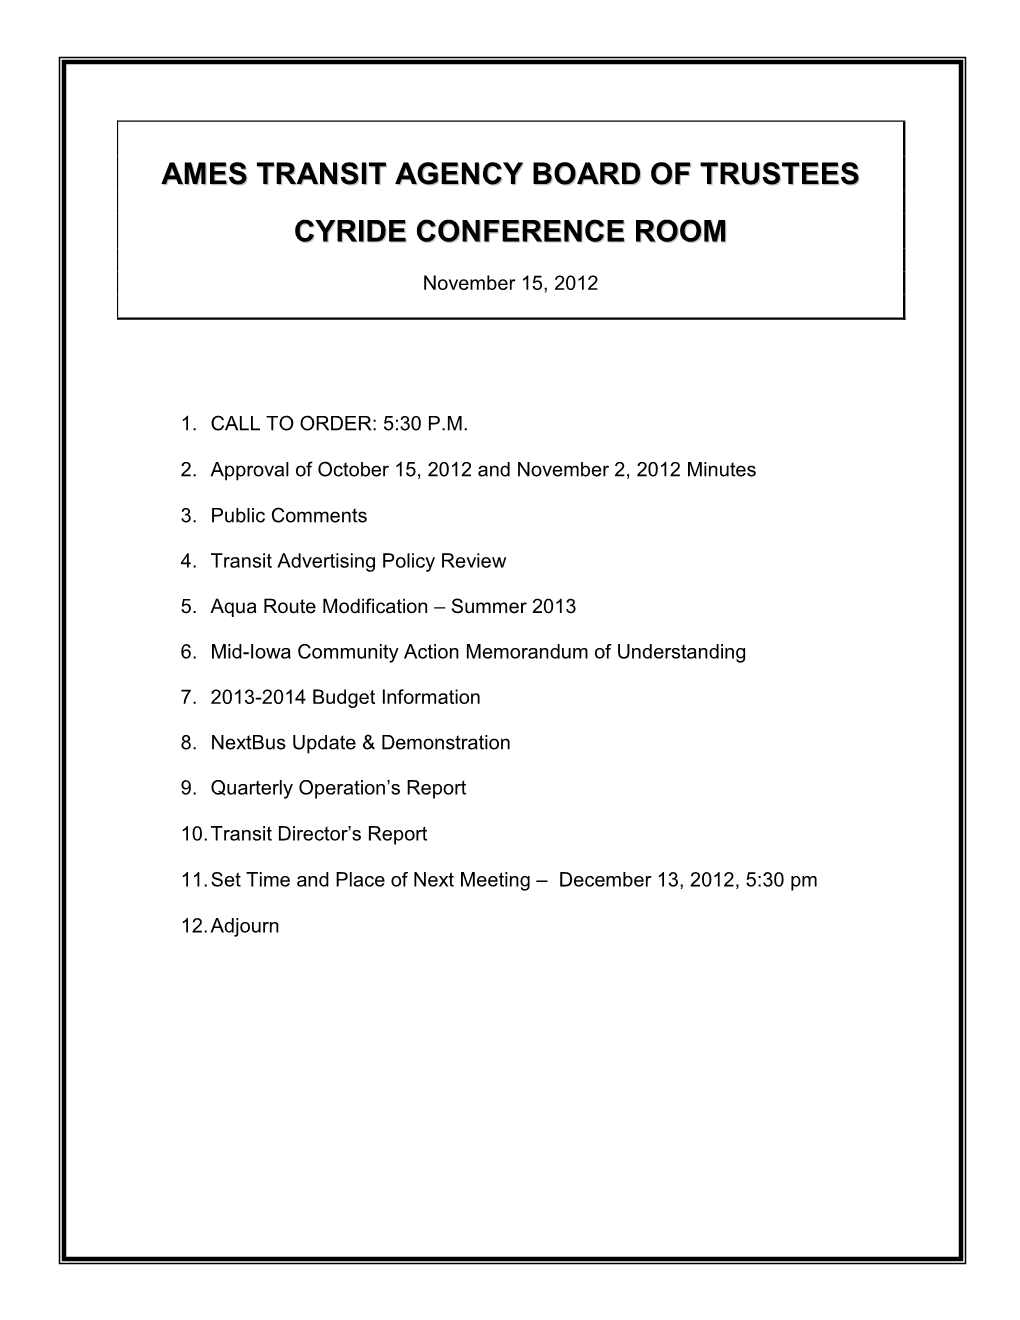 Ames Transit Agency Board of Trustees Cyride Conference Room